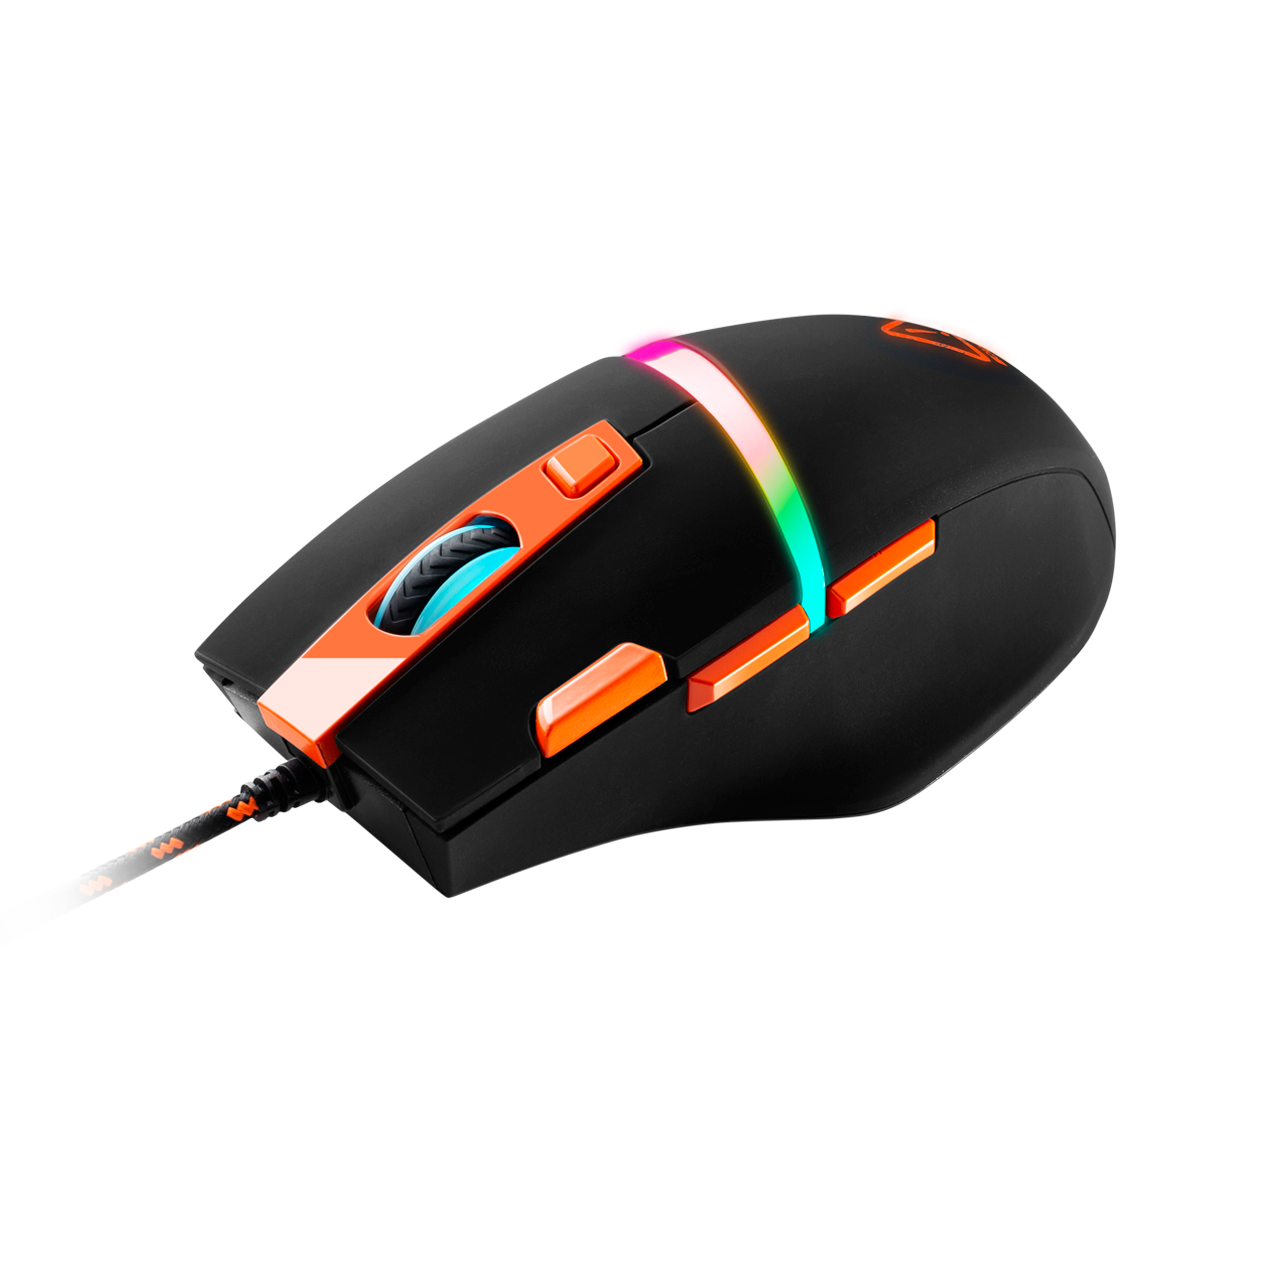 Мышь CANYON Sulaco GM-4 Wired Gaming Mouse with 7 programmable buttons, Pixart sensor of new generation, - фото 2 - id-p94642508